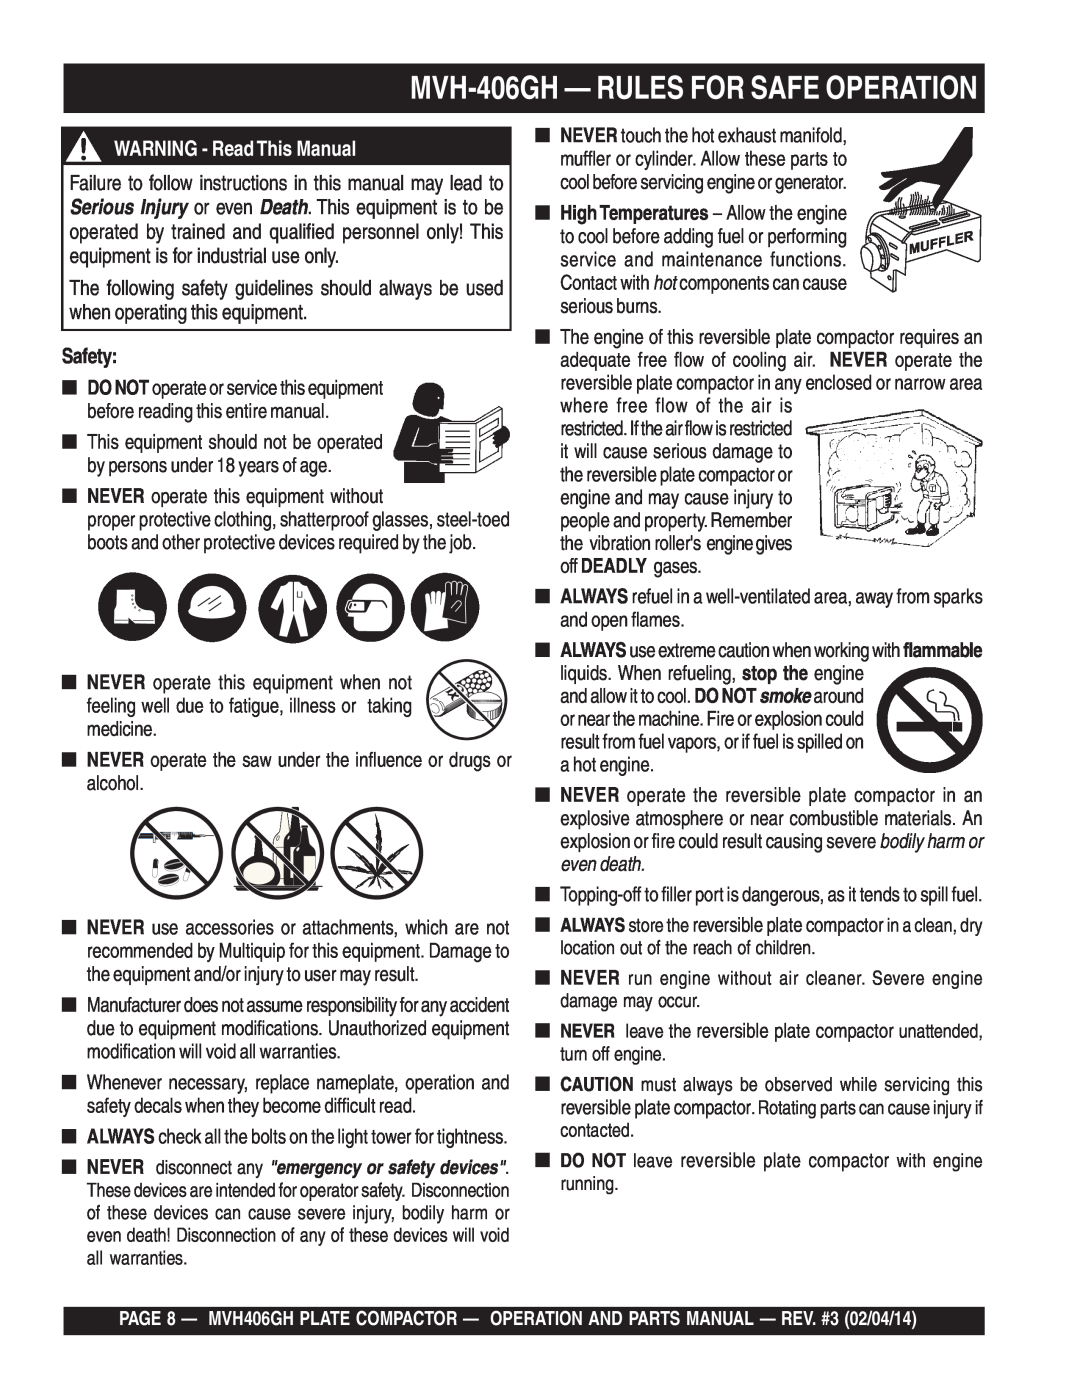 Multiquip MVH406GH manual MVH-406GH - RULES FOR SAFE OPERATION, WARNING - ReadThis Manual, Safety 